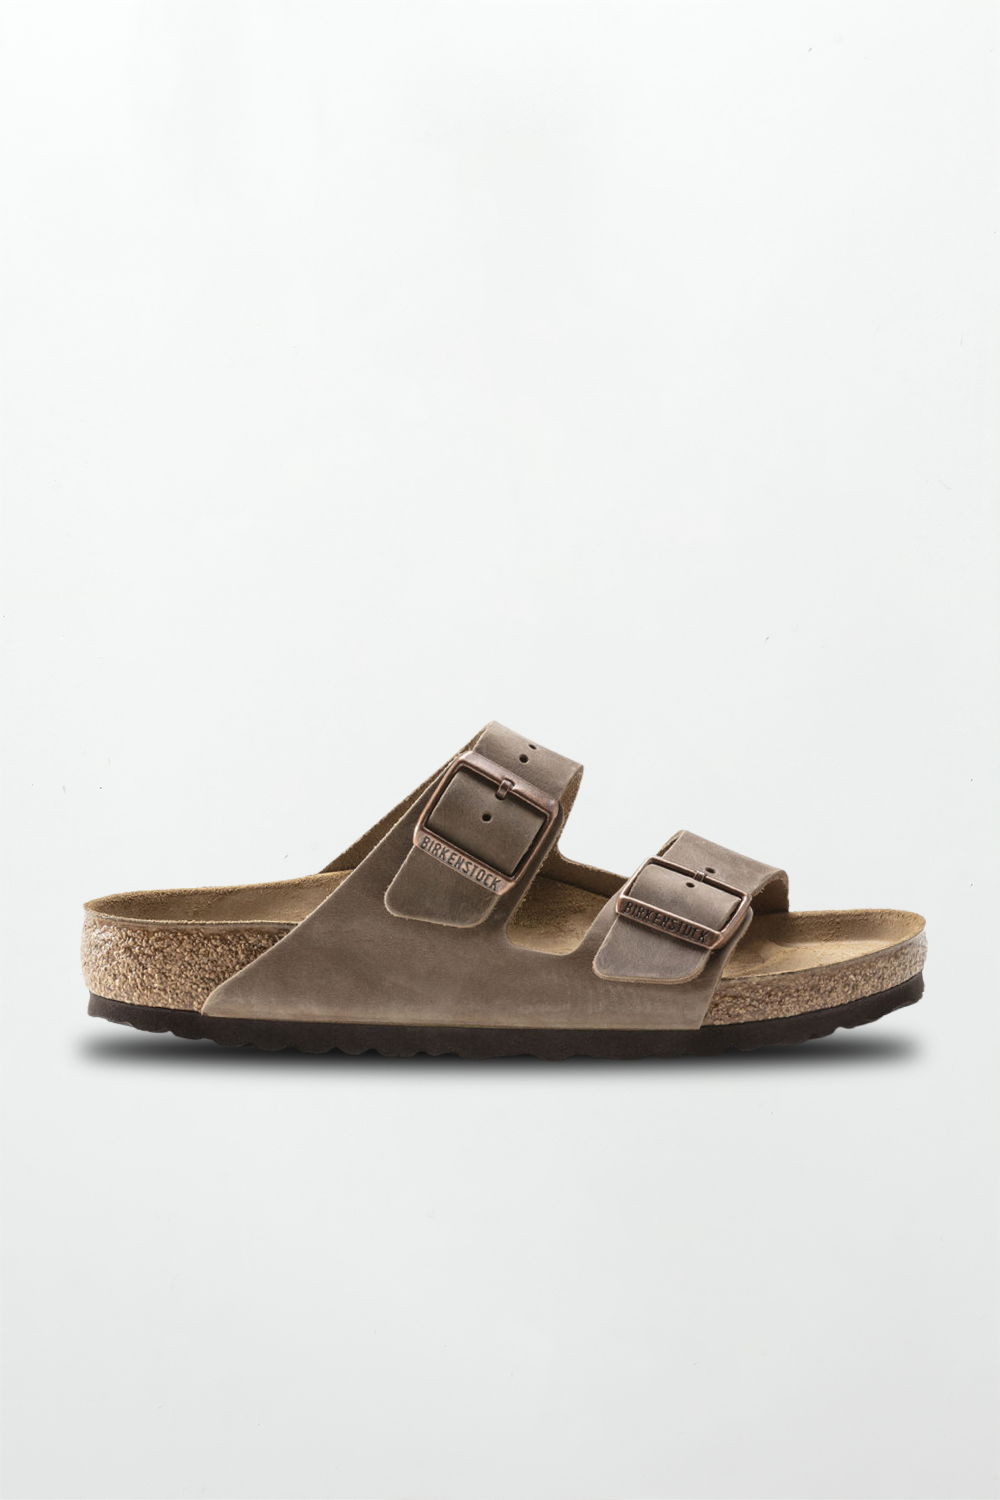 Arizona Oiled Leather in Tabacco Brown (Classic Footbed - Suede Lined) - Milu James St